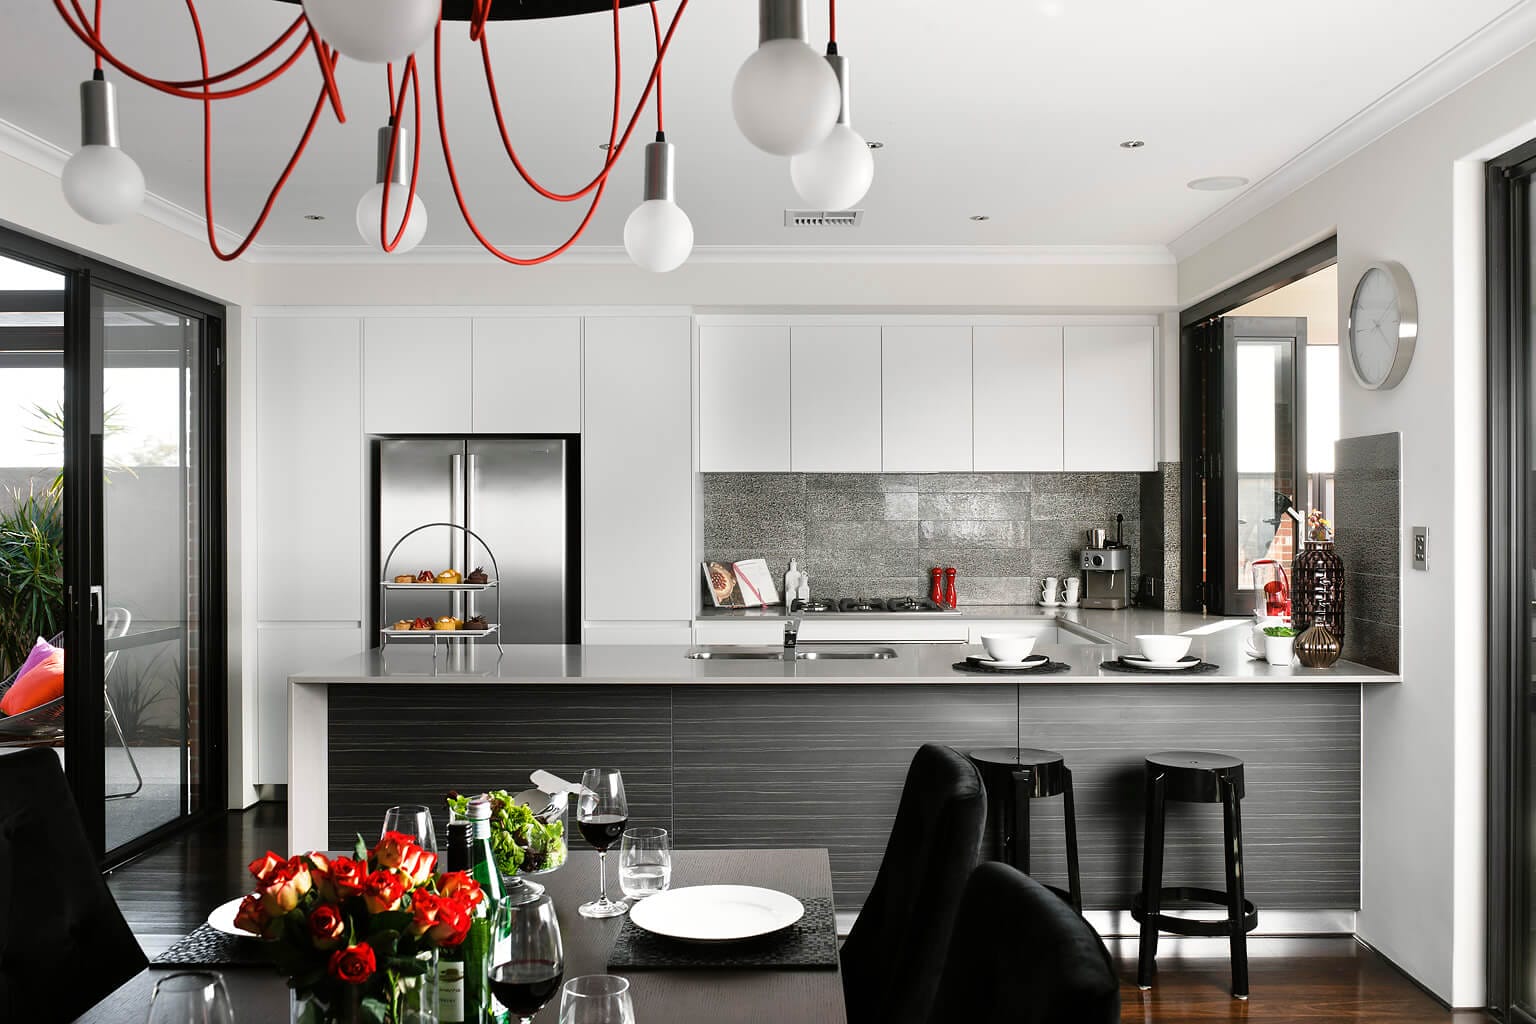 Incorporating Industrial Kitchen Design Into a Traditional Space